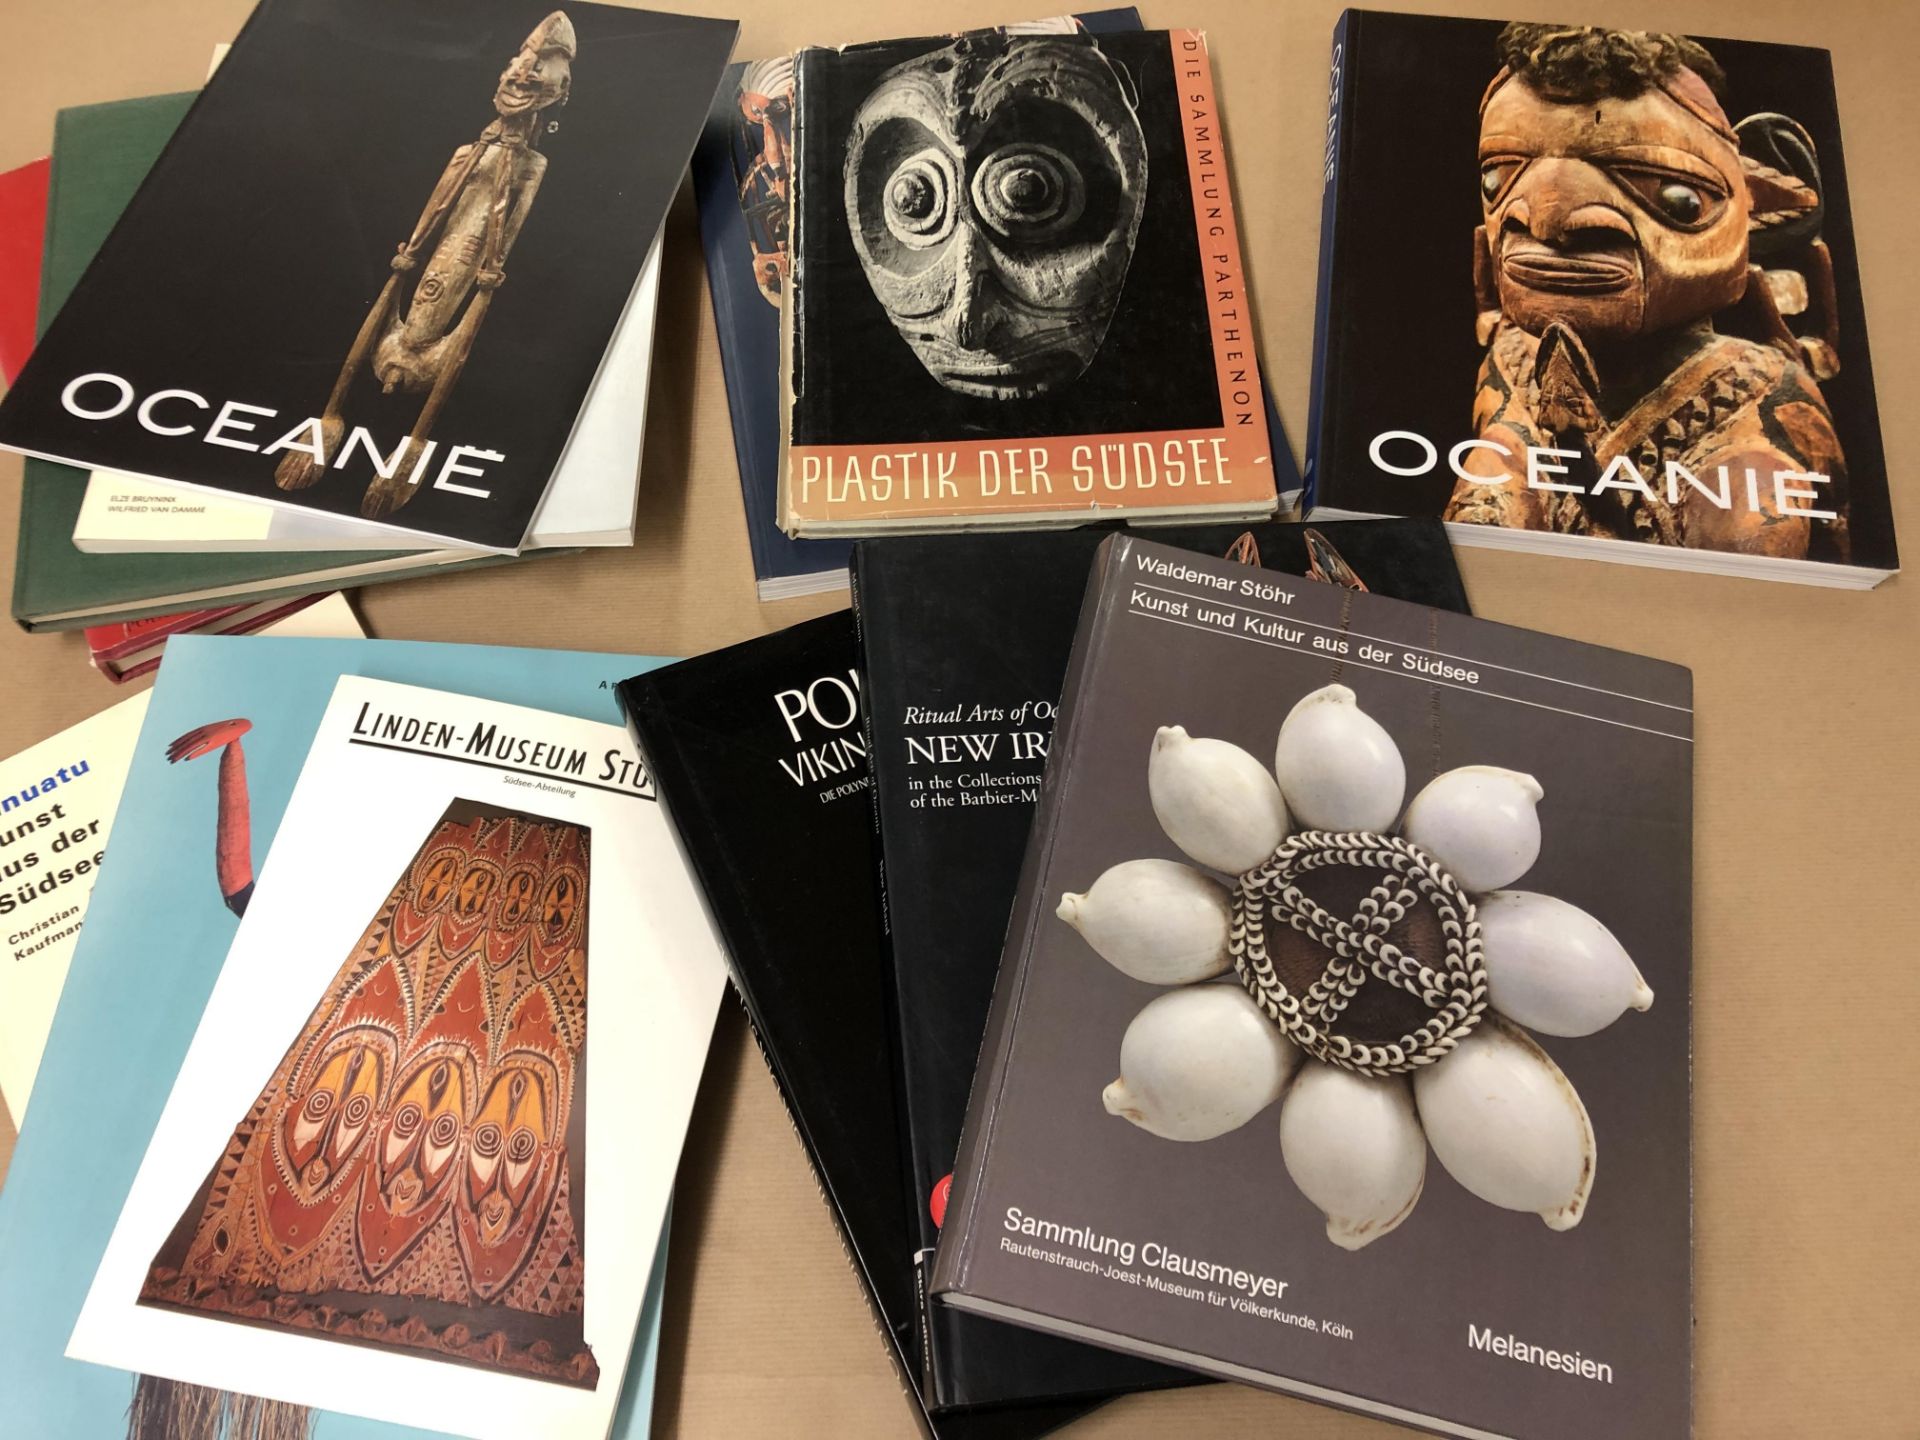 Twelve books on Oceanic and one on Polynesian cultures, arts and religions.